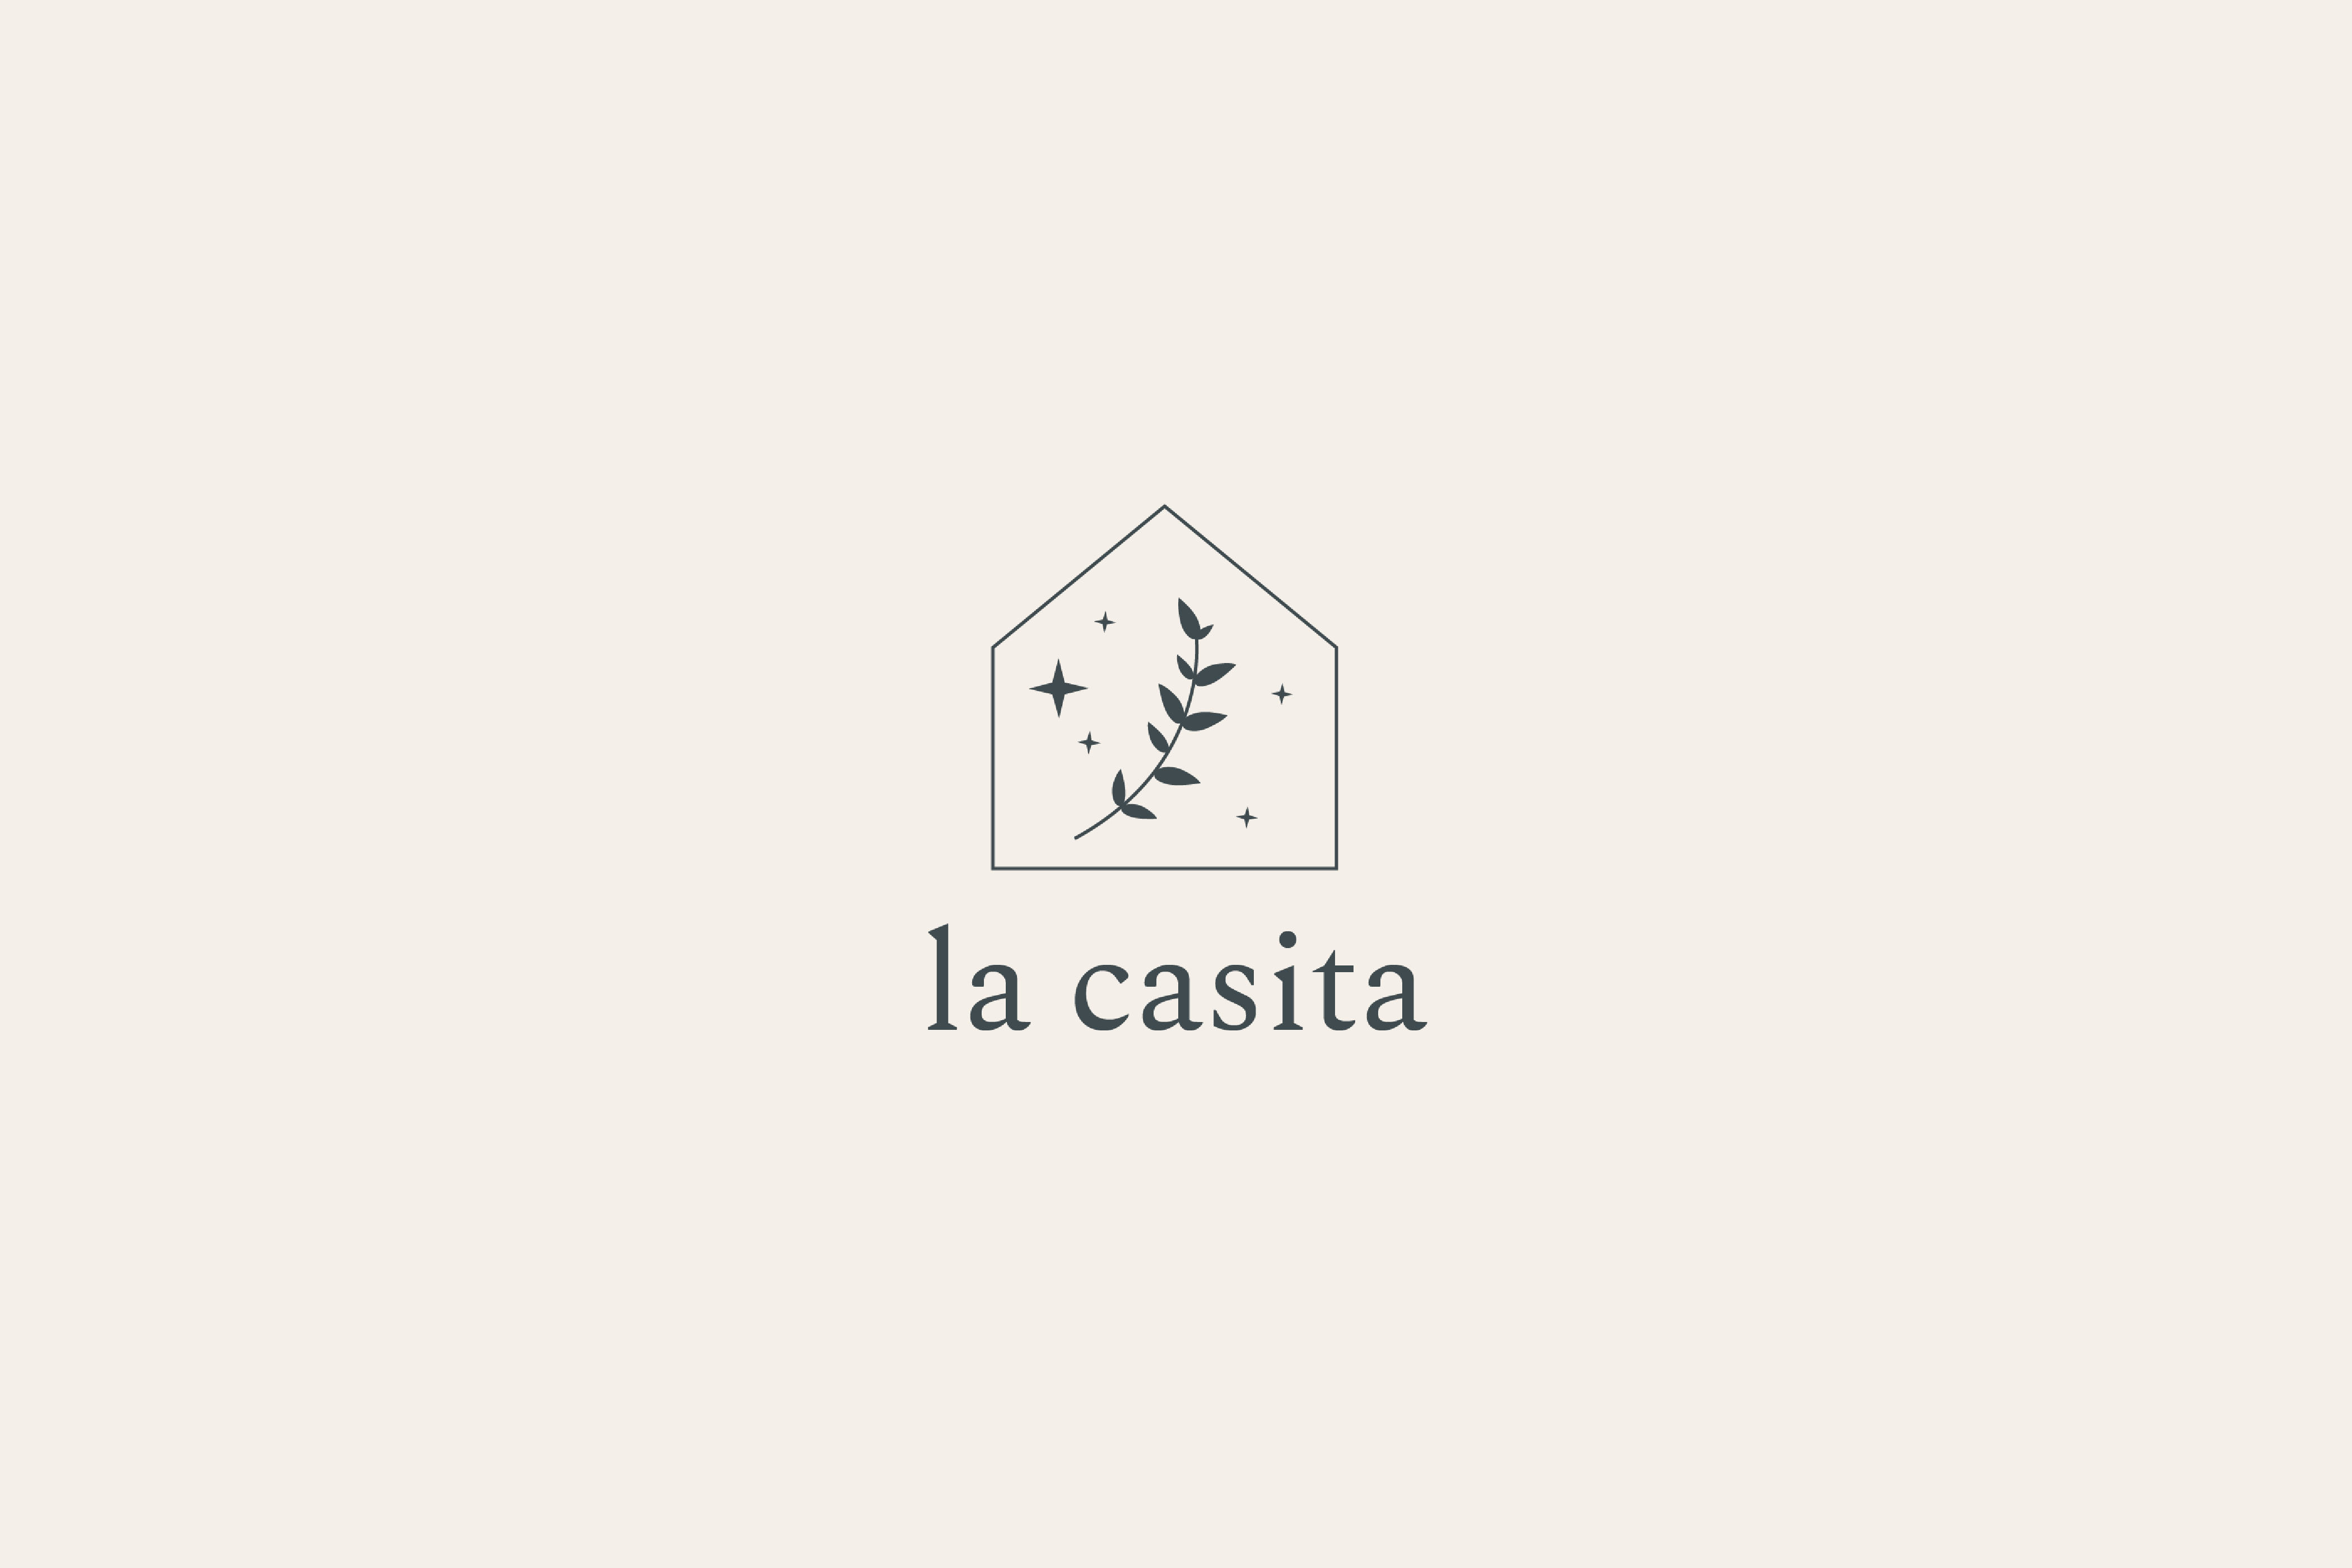 La Casita logo, a small house with branch and stars inside